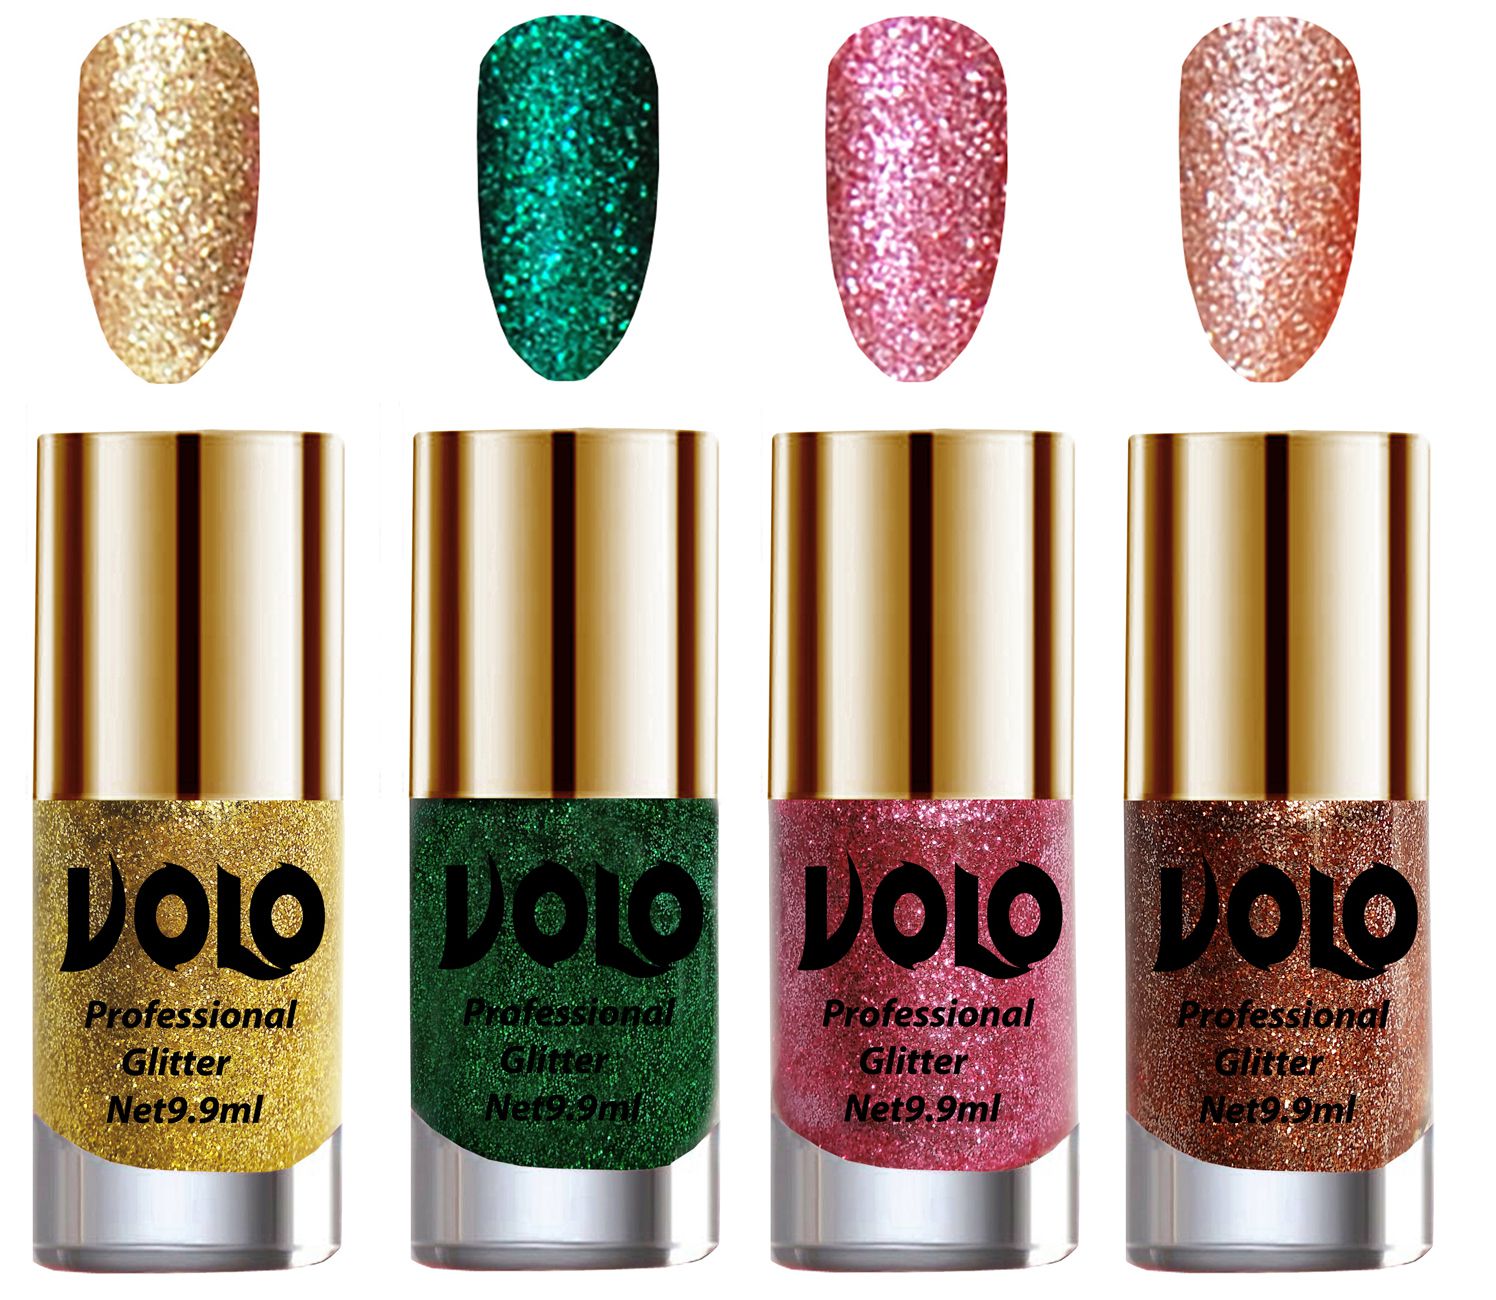     			VOLO Professionally Used Glitter Shine Nail Polish Gold,Green,Pink Pink Pack of 4 39 mL